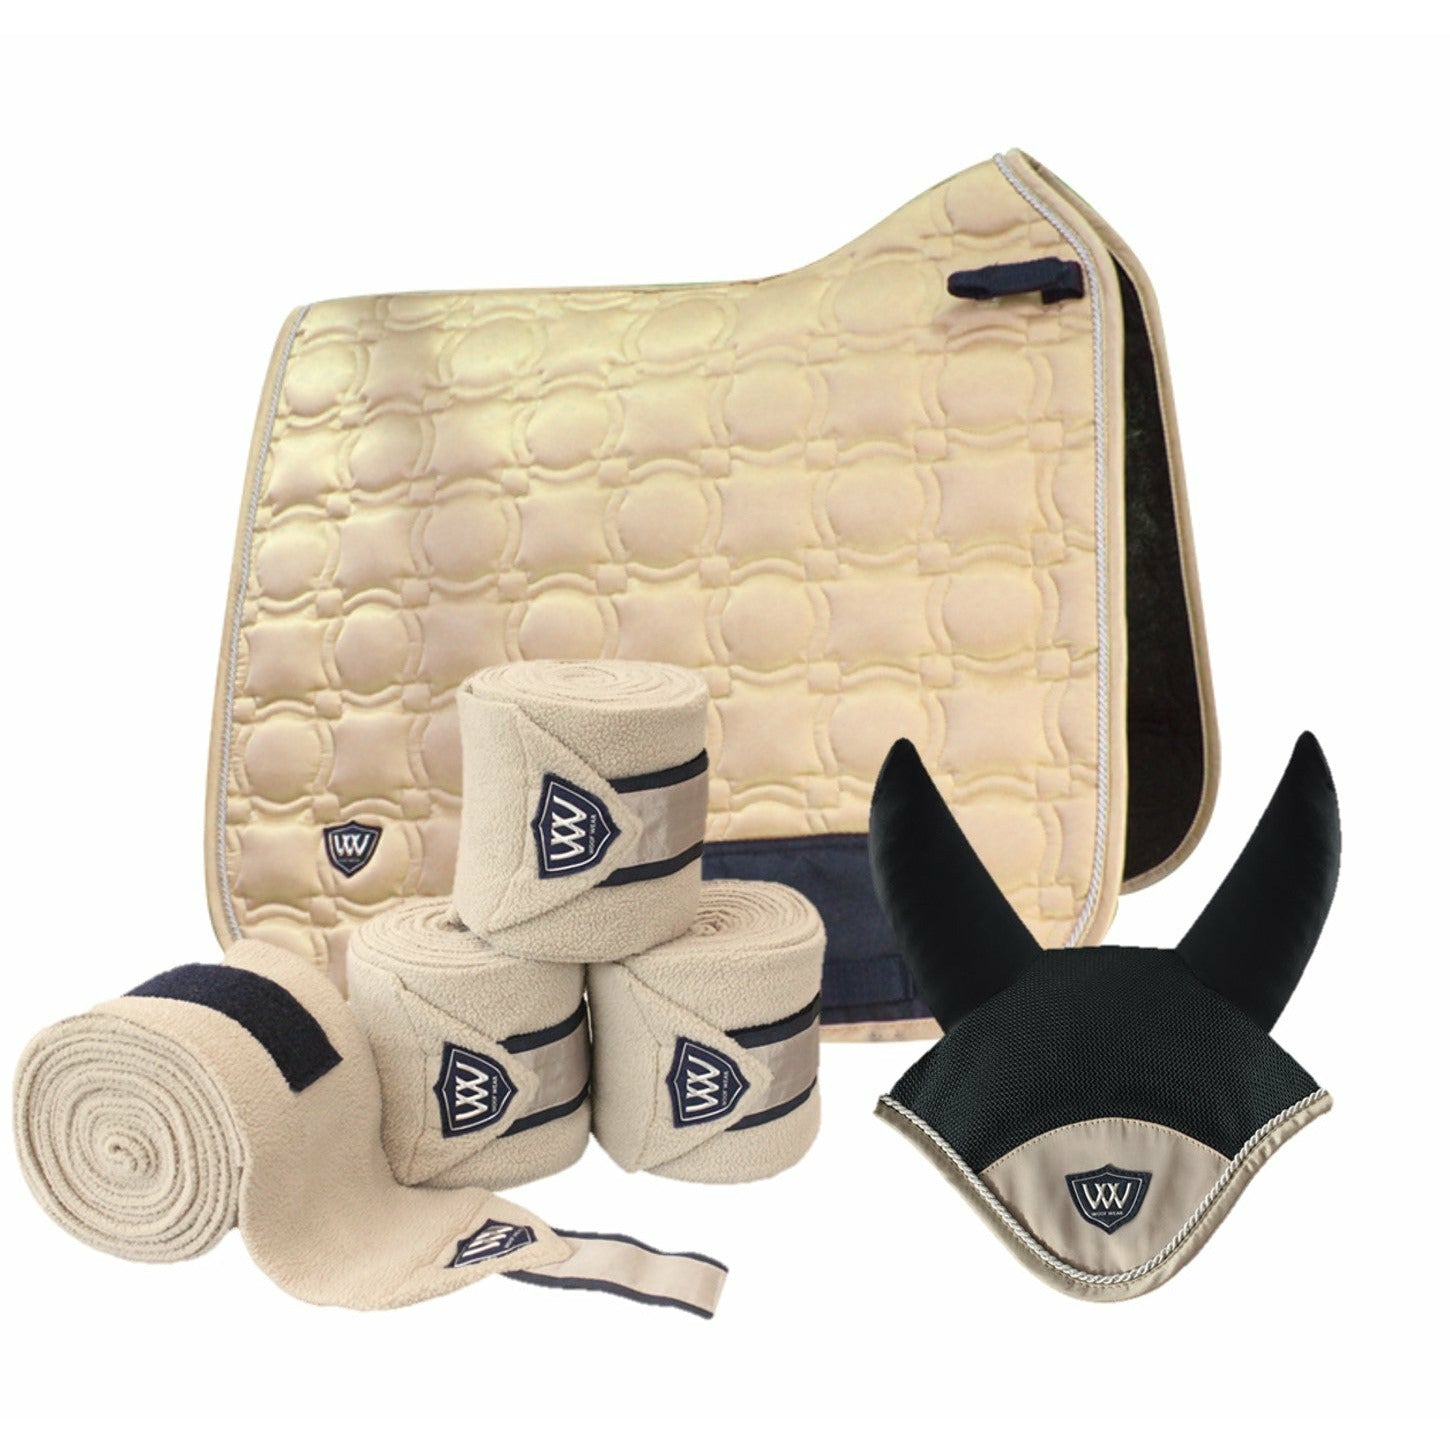 Woof Wear Vision Champagne set - SAVE 20%